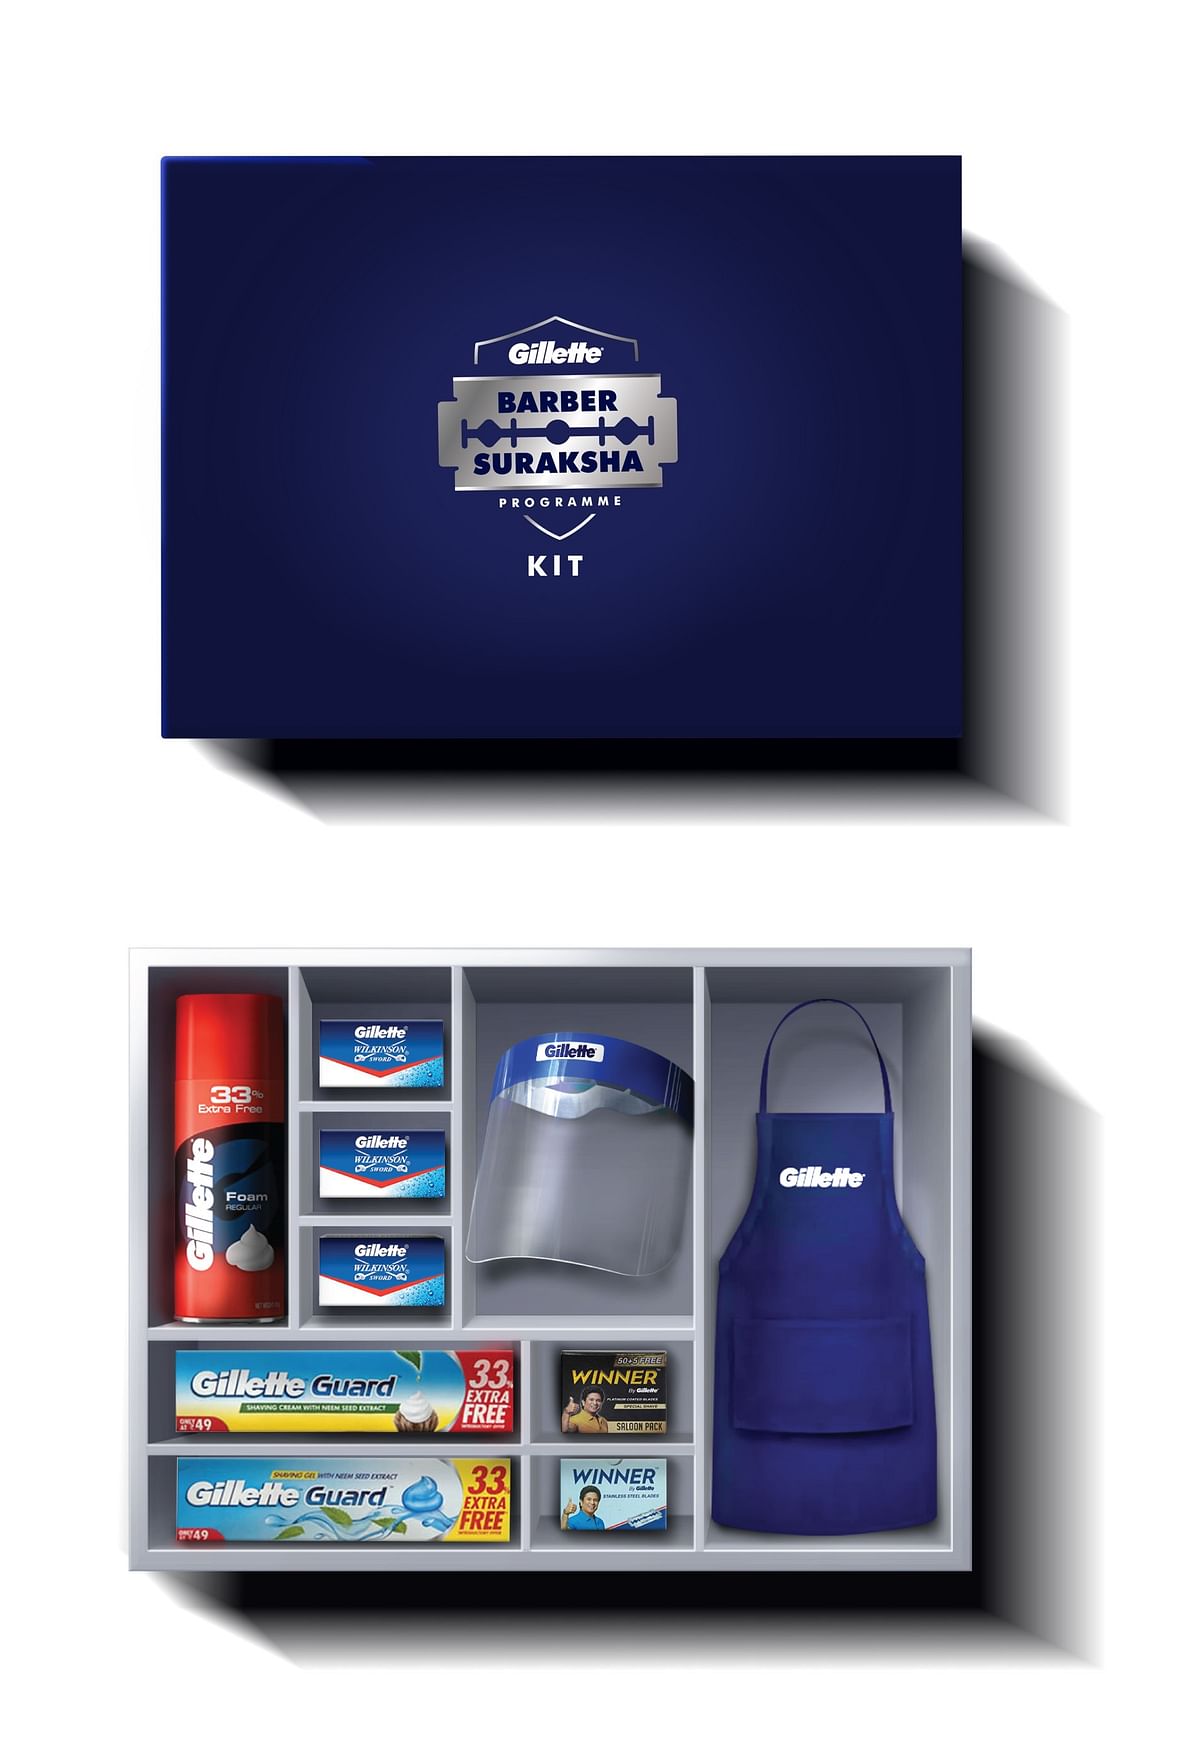 Under the programme, barbers will be provided with Gillette Suraksha Kits.